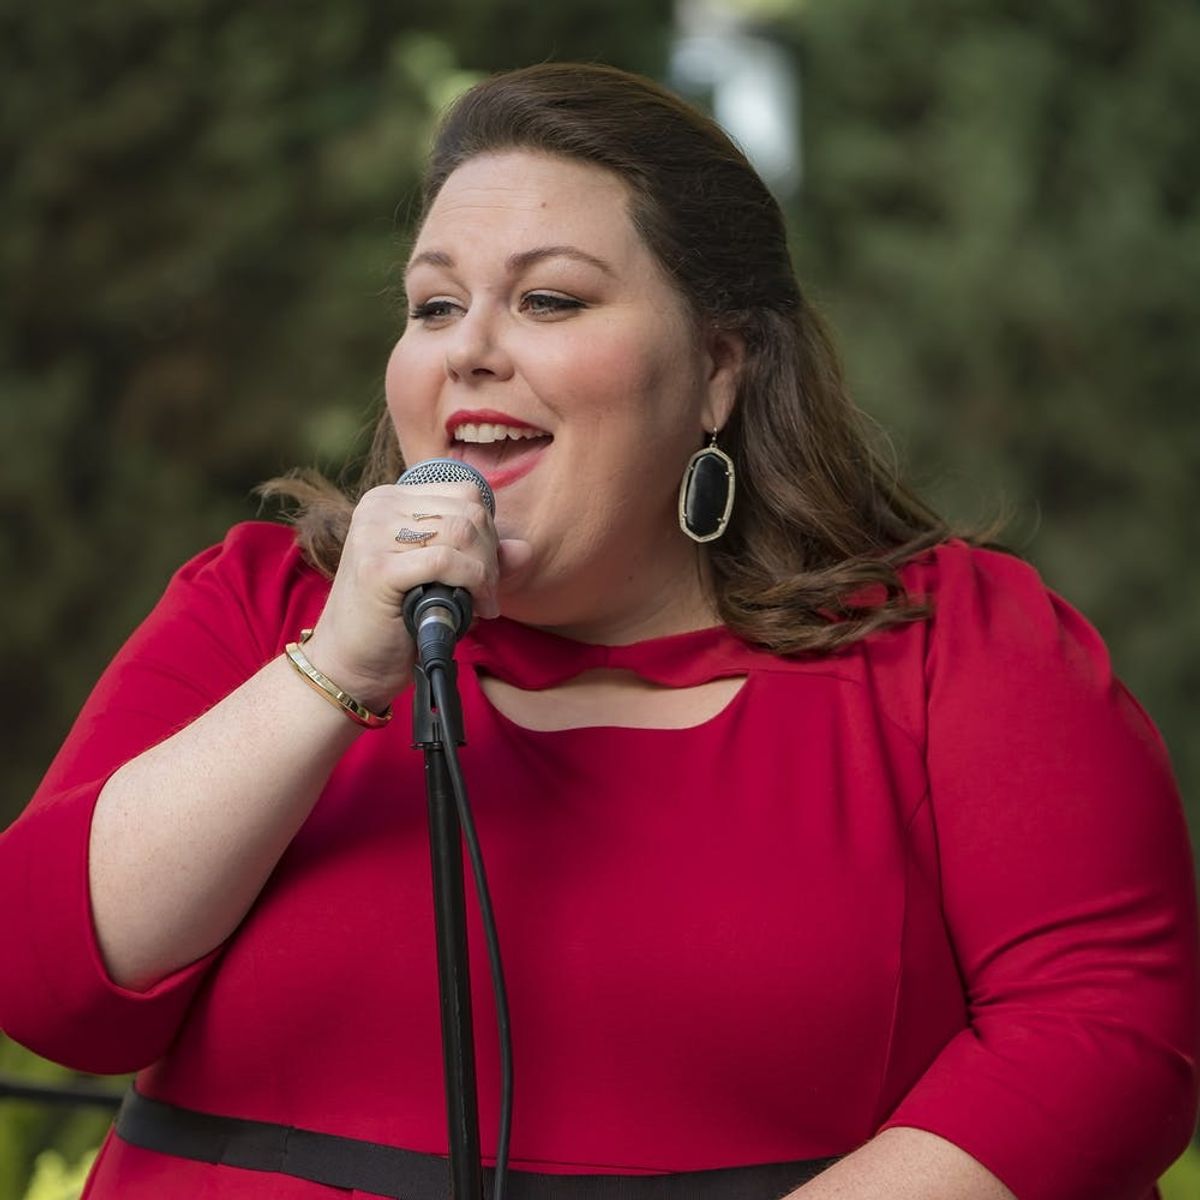 Chrissy Metz and 8 Other Talented Celebs Who Auditioned for ‘American Idol’